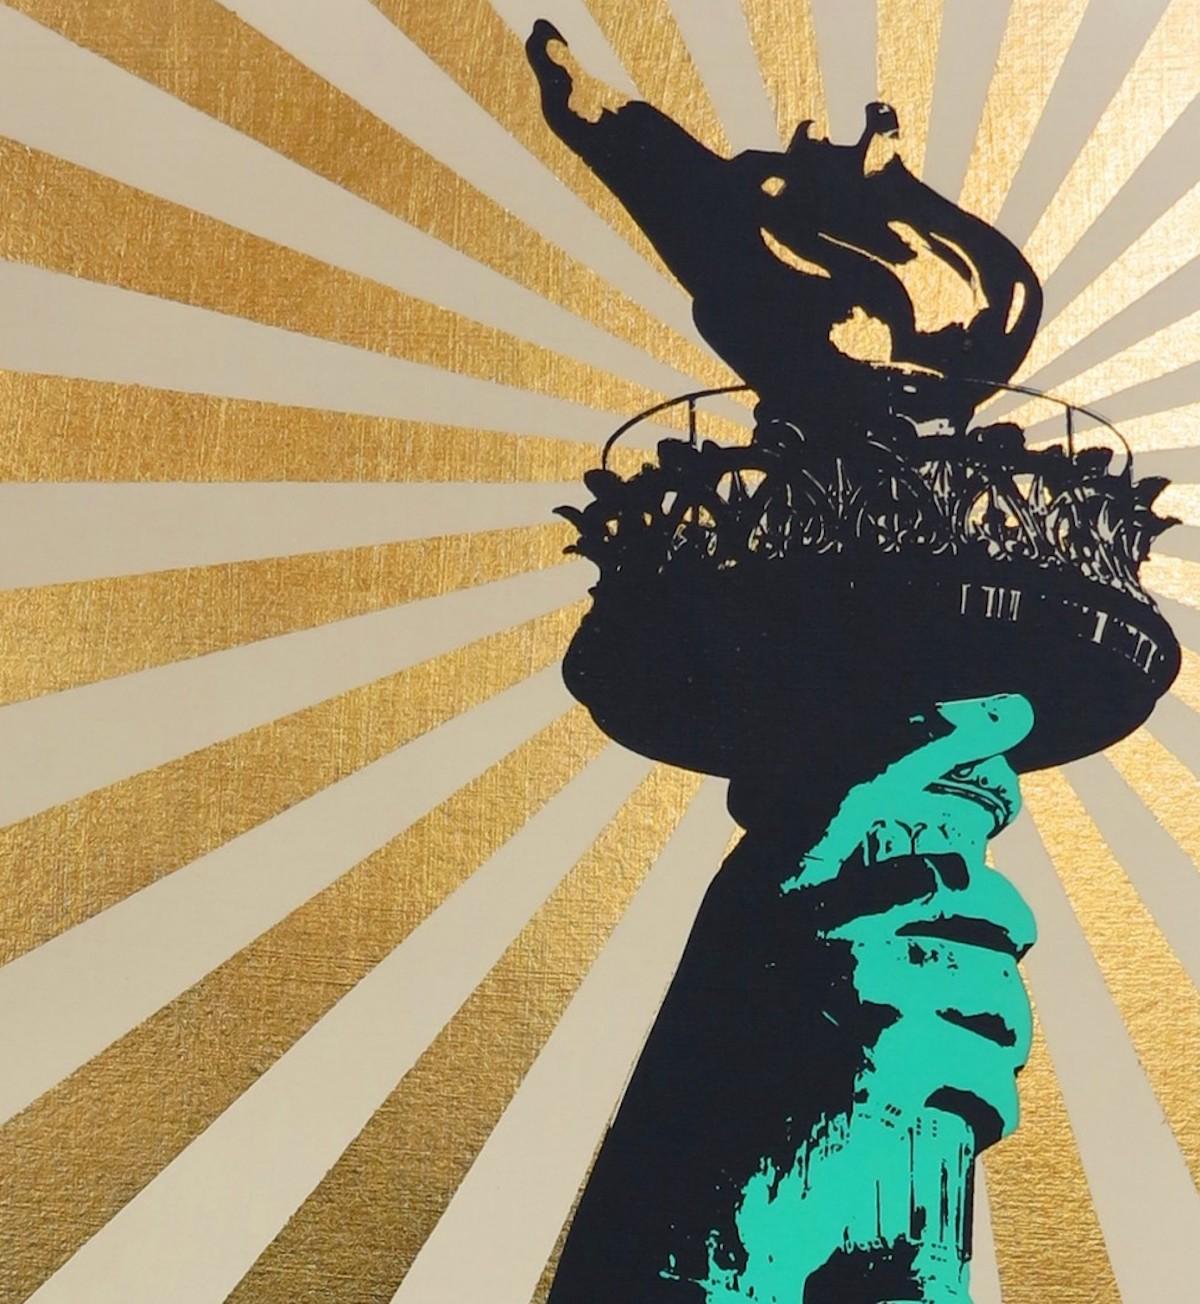 Sweet Land of Liberty is a limited edition screen print on archival museum board with hand-applied gold leaf by Jayson Lilley.
Jayson Lilley is available online and in our gallery at Wychwood Art. Contemporary artist, Jayson Lilley, has worked at